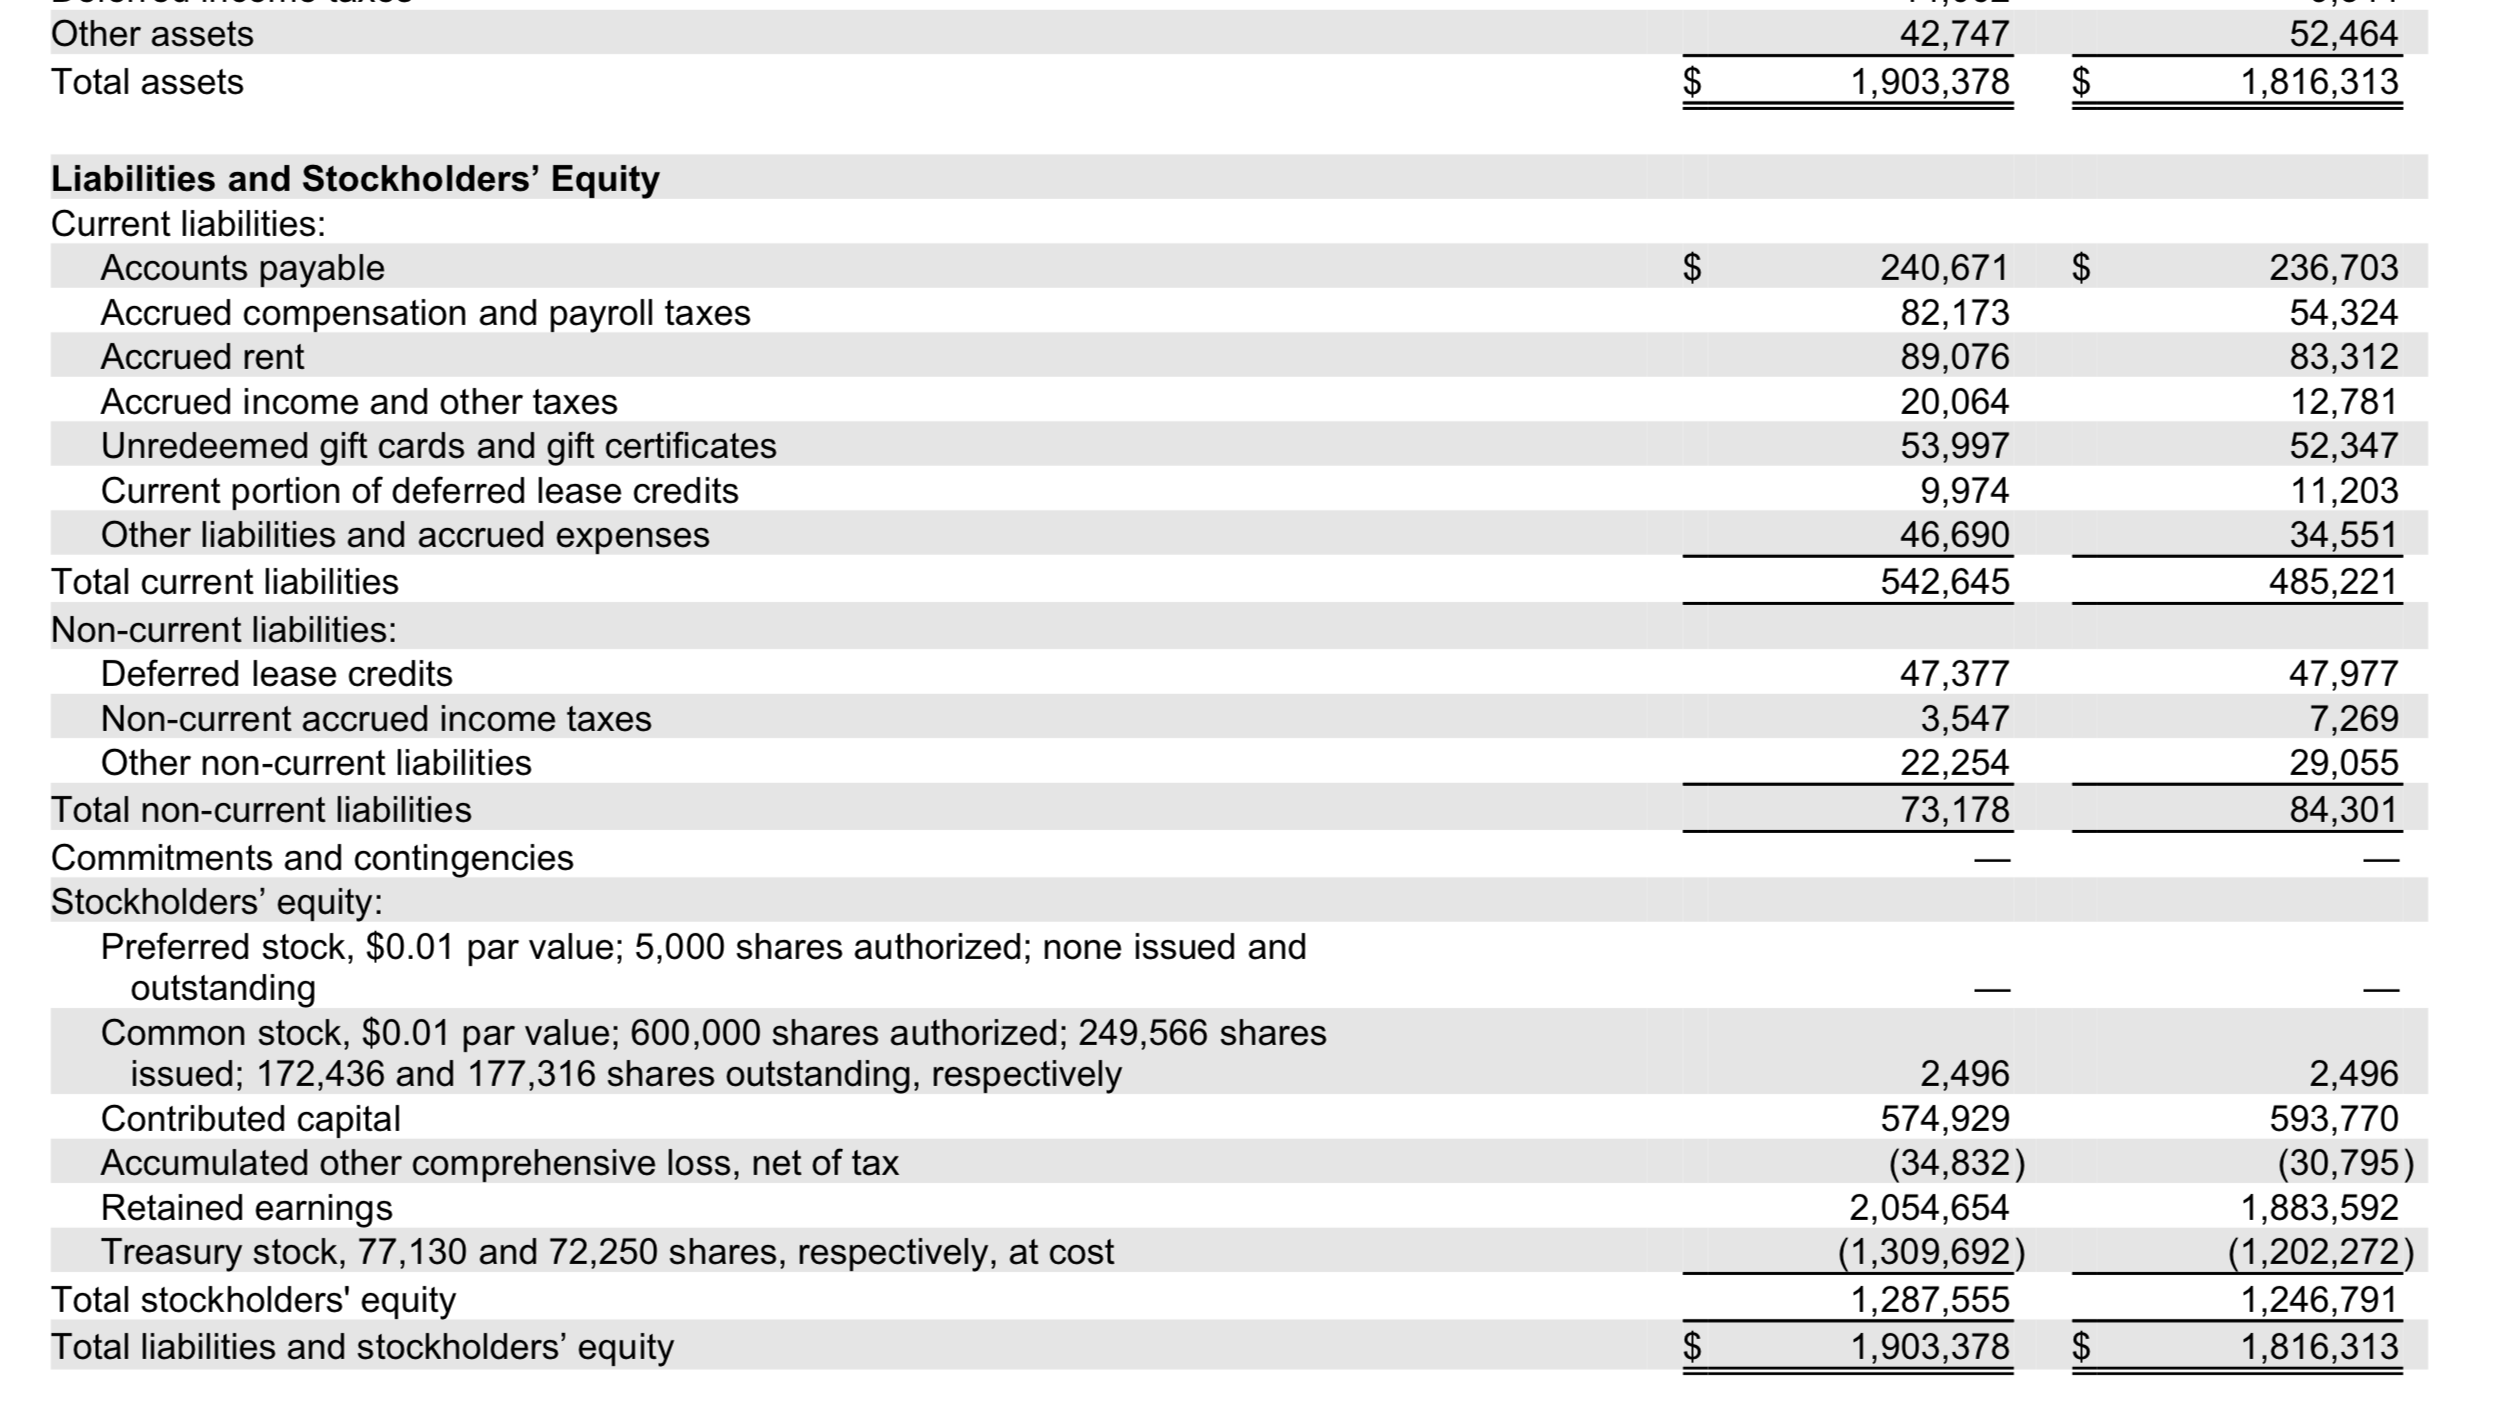 Other assets
42,747
1,903,378
52,464
1,816,313
Total assets
Liabilities and Stockholders' Equity
Current liabilities:
Accounts payable
Accrued compensation and payroll taxes
$
$
82,173
89,076
20,064
53,997
9,974
236,703
54,324
83,312
12,781
52,347
11,203
240,671
Accrued rent
Accrued income and other taxes
Unredeemed gift cards and gift certificates
Current portion of deferred lease credits
Other liabilities and accrued expenses
46,690
542,645
34,551
485,221
Total current liabilities
Non-current liabilities:
47,377
47,977
7,269
29,055
84,301
Deferred lease credits
3,547
22,254
73,178
Non-current accrued income taxes
Other non-current liabilities
Total non-current liabilities
Commitments and contingencies
Stockholders' equity:
Preferred stock, $0.01 par value; 5,000 shares authorized; none issued and
outstanding
Common stock, $0.01 par value; 600,000 shares authorized; 249,566 shares
issued; 172,436 and 177,316 shares outstanding, respectively
Contributed capital
Accumulated other comprehensive loss, net of tax
Retained earnings
Treasury stock, 77,130 and 72,250 shares, respectively, at cost
Total stockholders' equity
Total liabilities and stockholders' equity
2,496
574,929
(34,832)
2,054,654
2,496
593,770
(30,795)
1,883,592
(1,309,692)
1,287,555
1,903,378
(1,202,272)
1,246,791
1,816,313
%24
